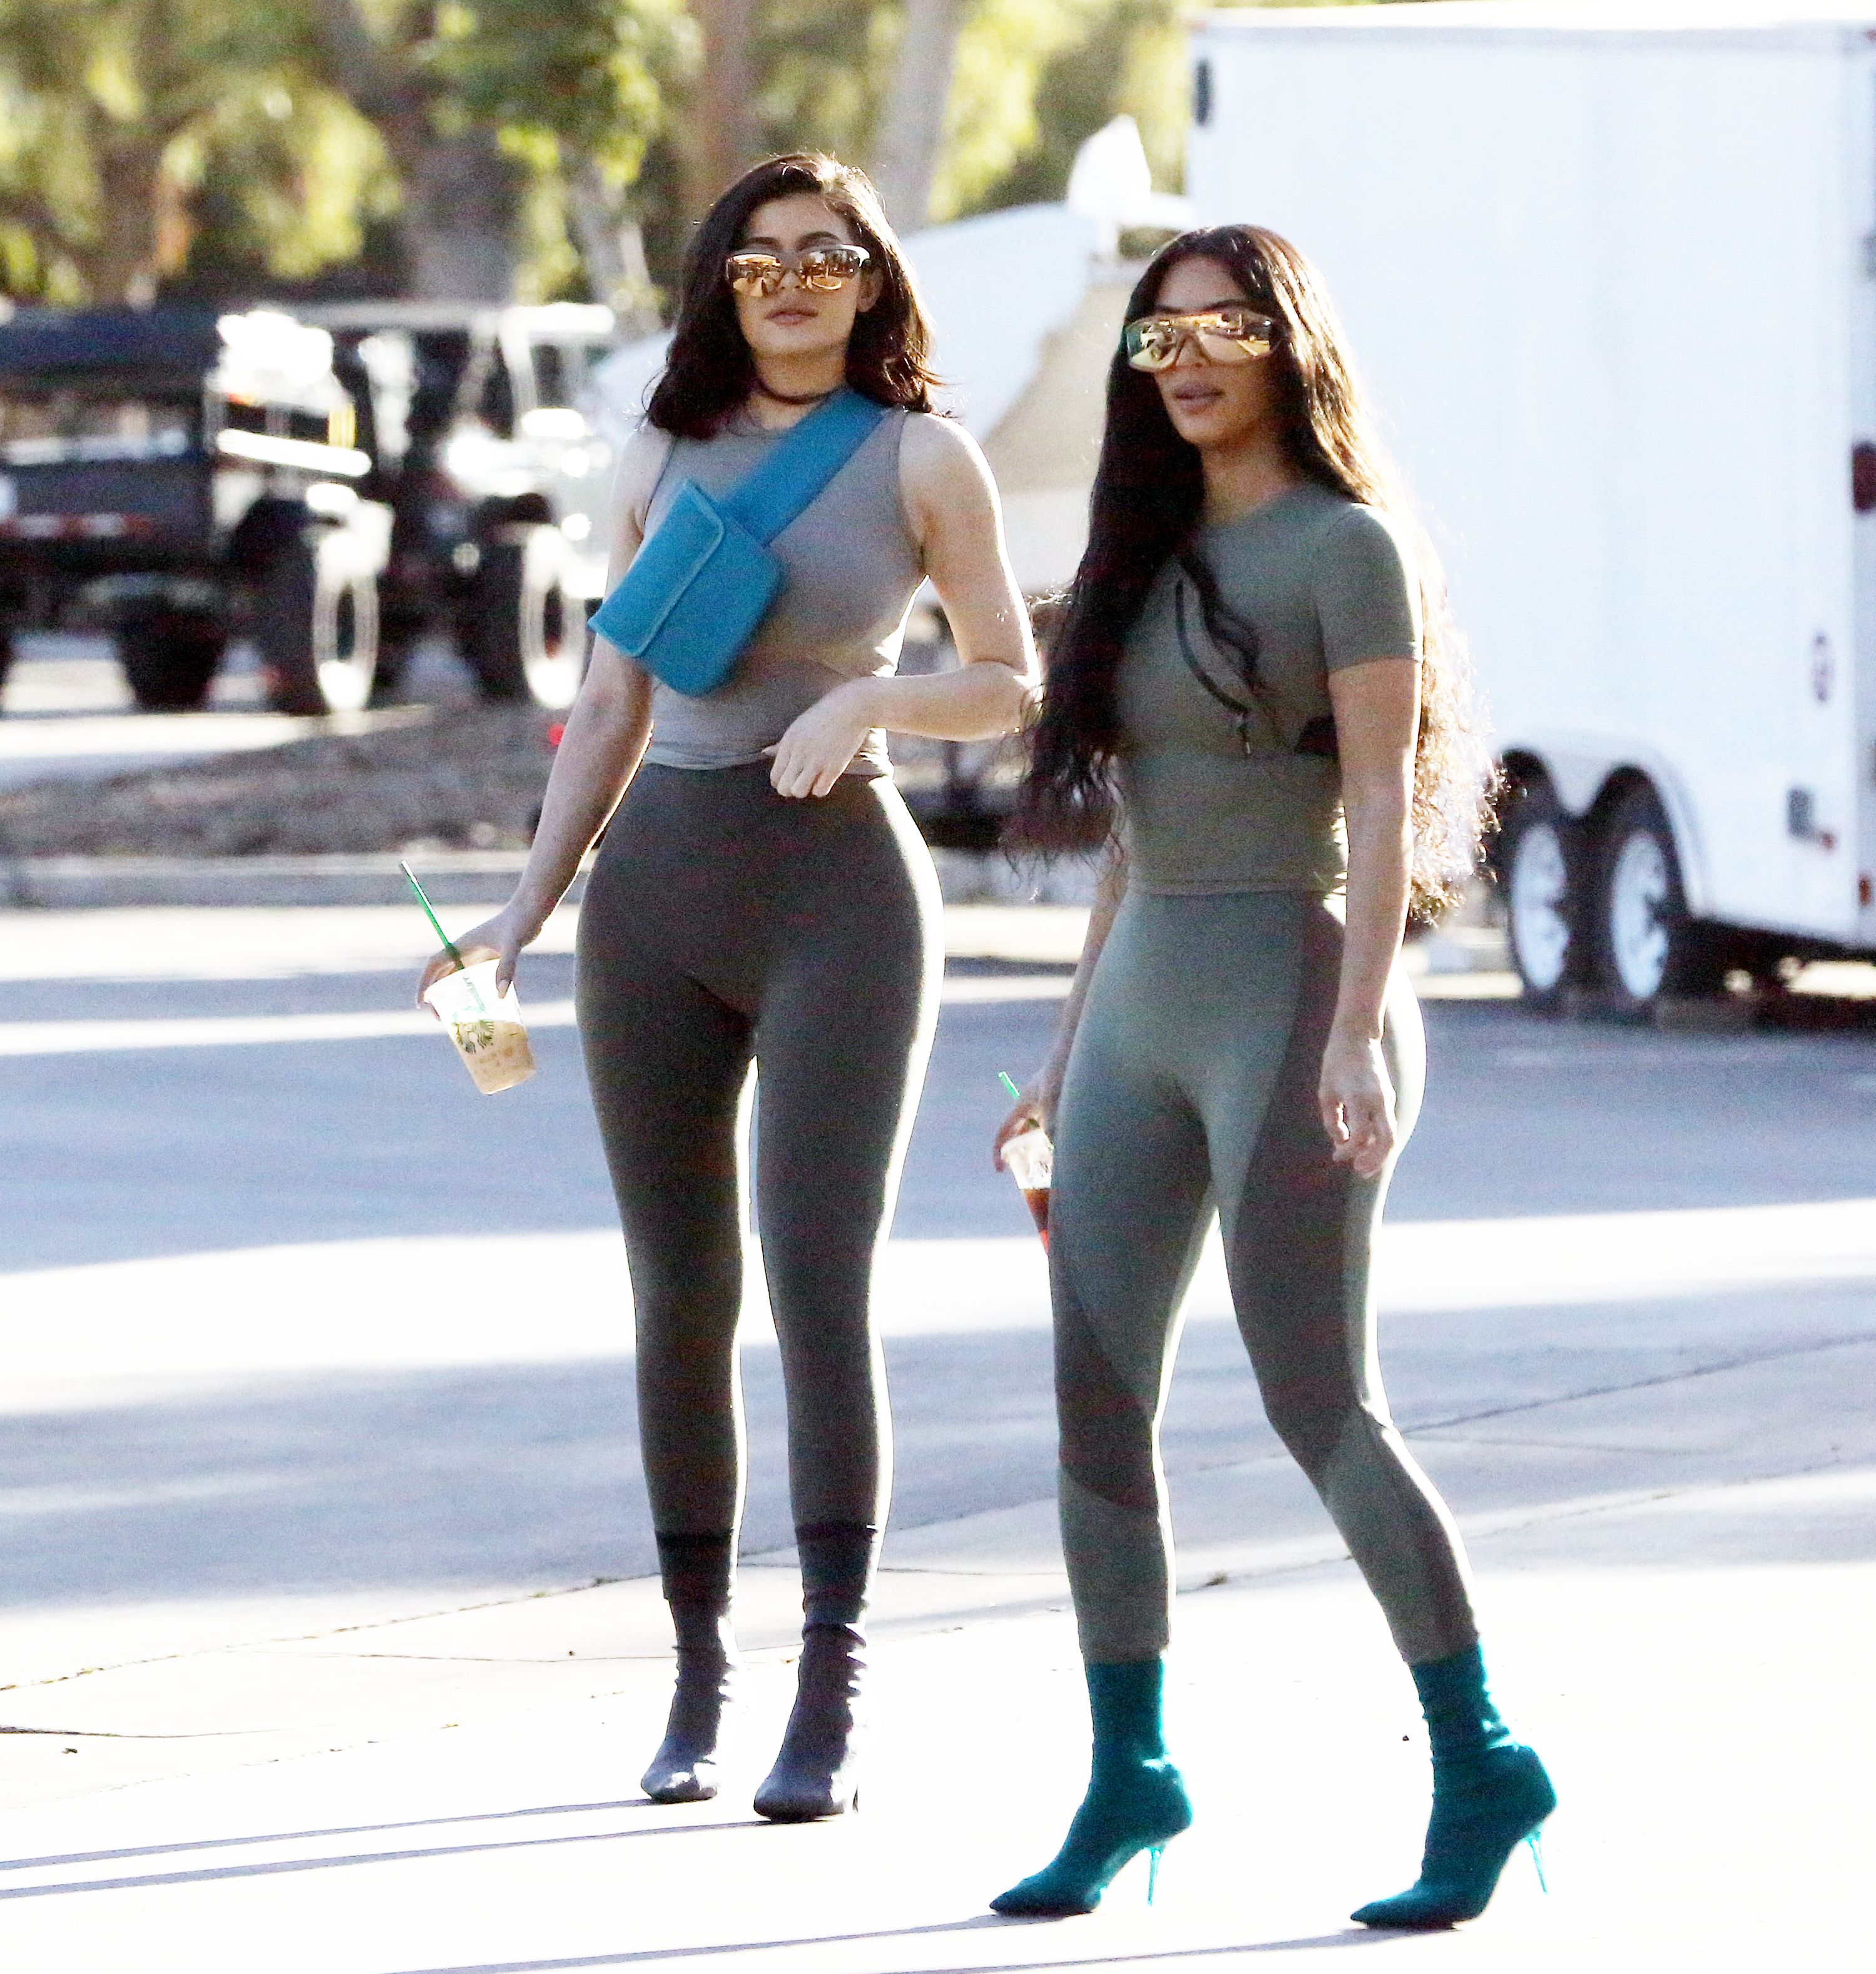 Kim Kardashian Kylie Jenner Like Twins in These Photos – Kylie and Kim Wear Matching Leggings, Outfits